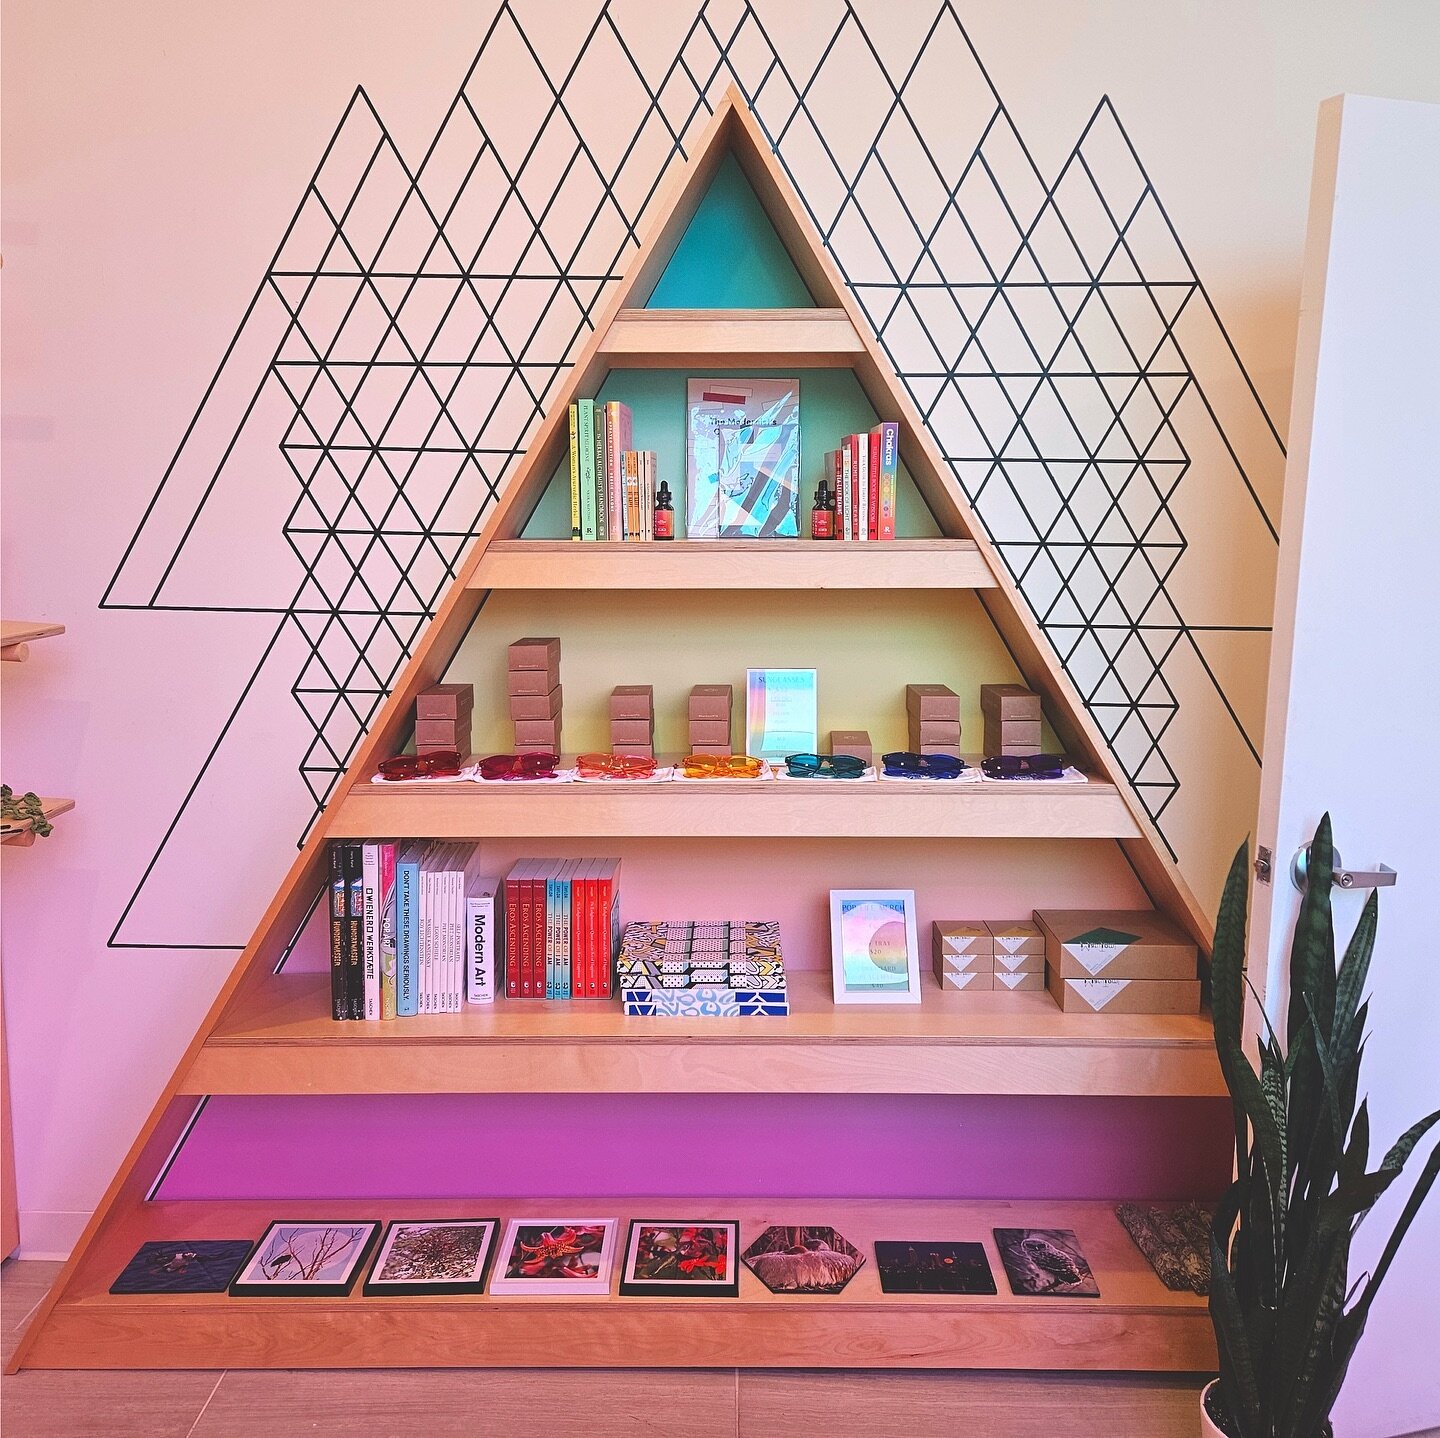 The PL pyramid is filled up with all new items!🌈

Hurry! Our ever-changing retail shop offers limited-time items! We have everything from wellness + yoga essentials to one of a kind art pieces, great books &amp; more✨

Visit us on weekdays from 6:30